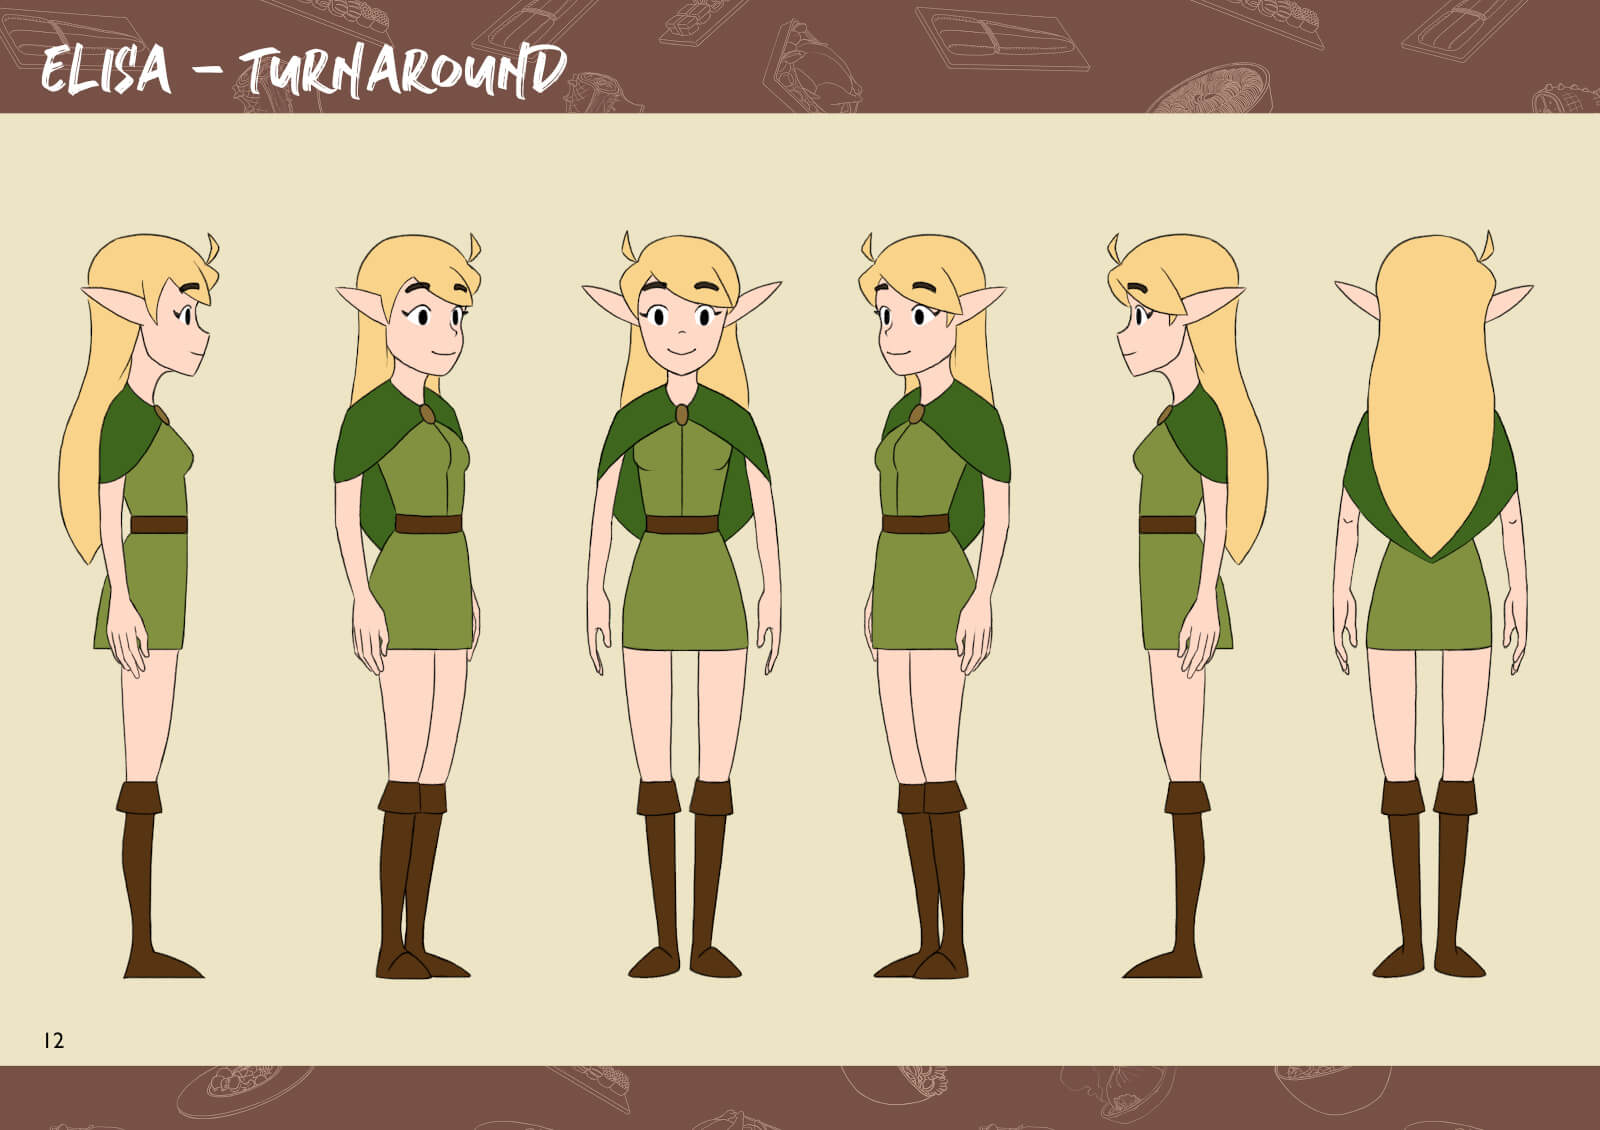 Elf character from multiple angles